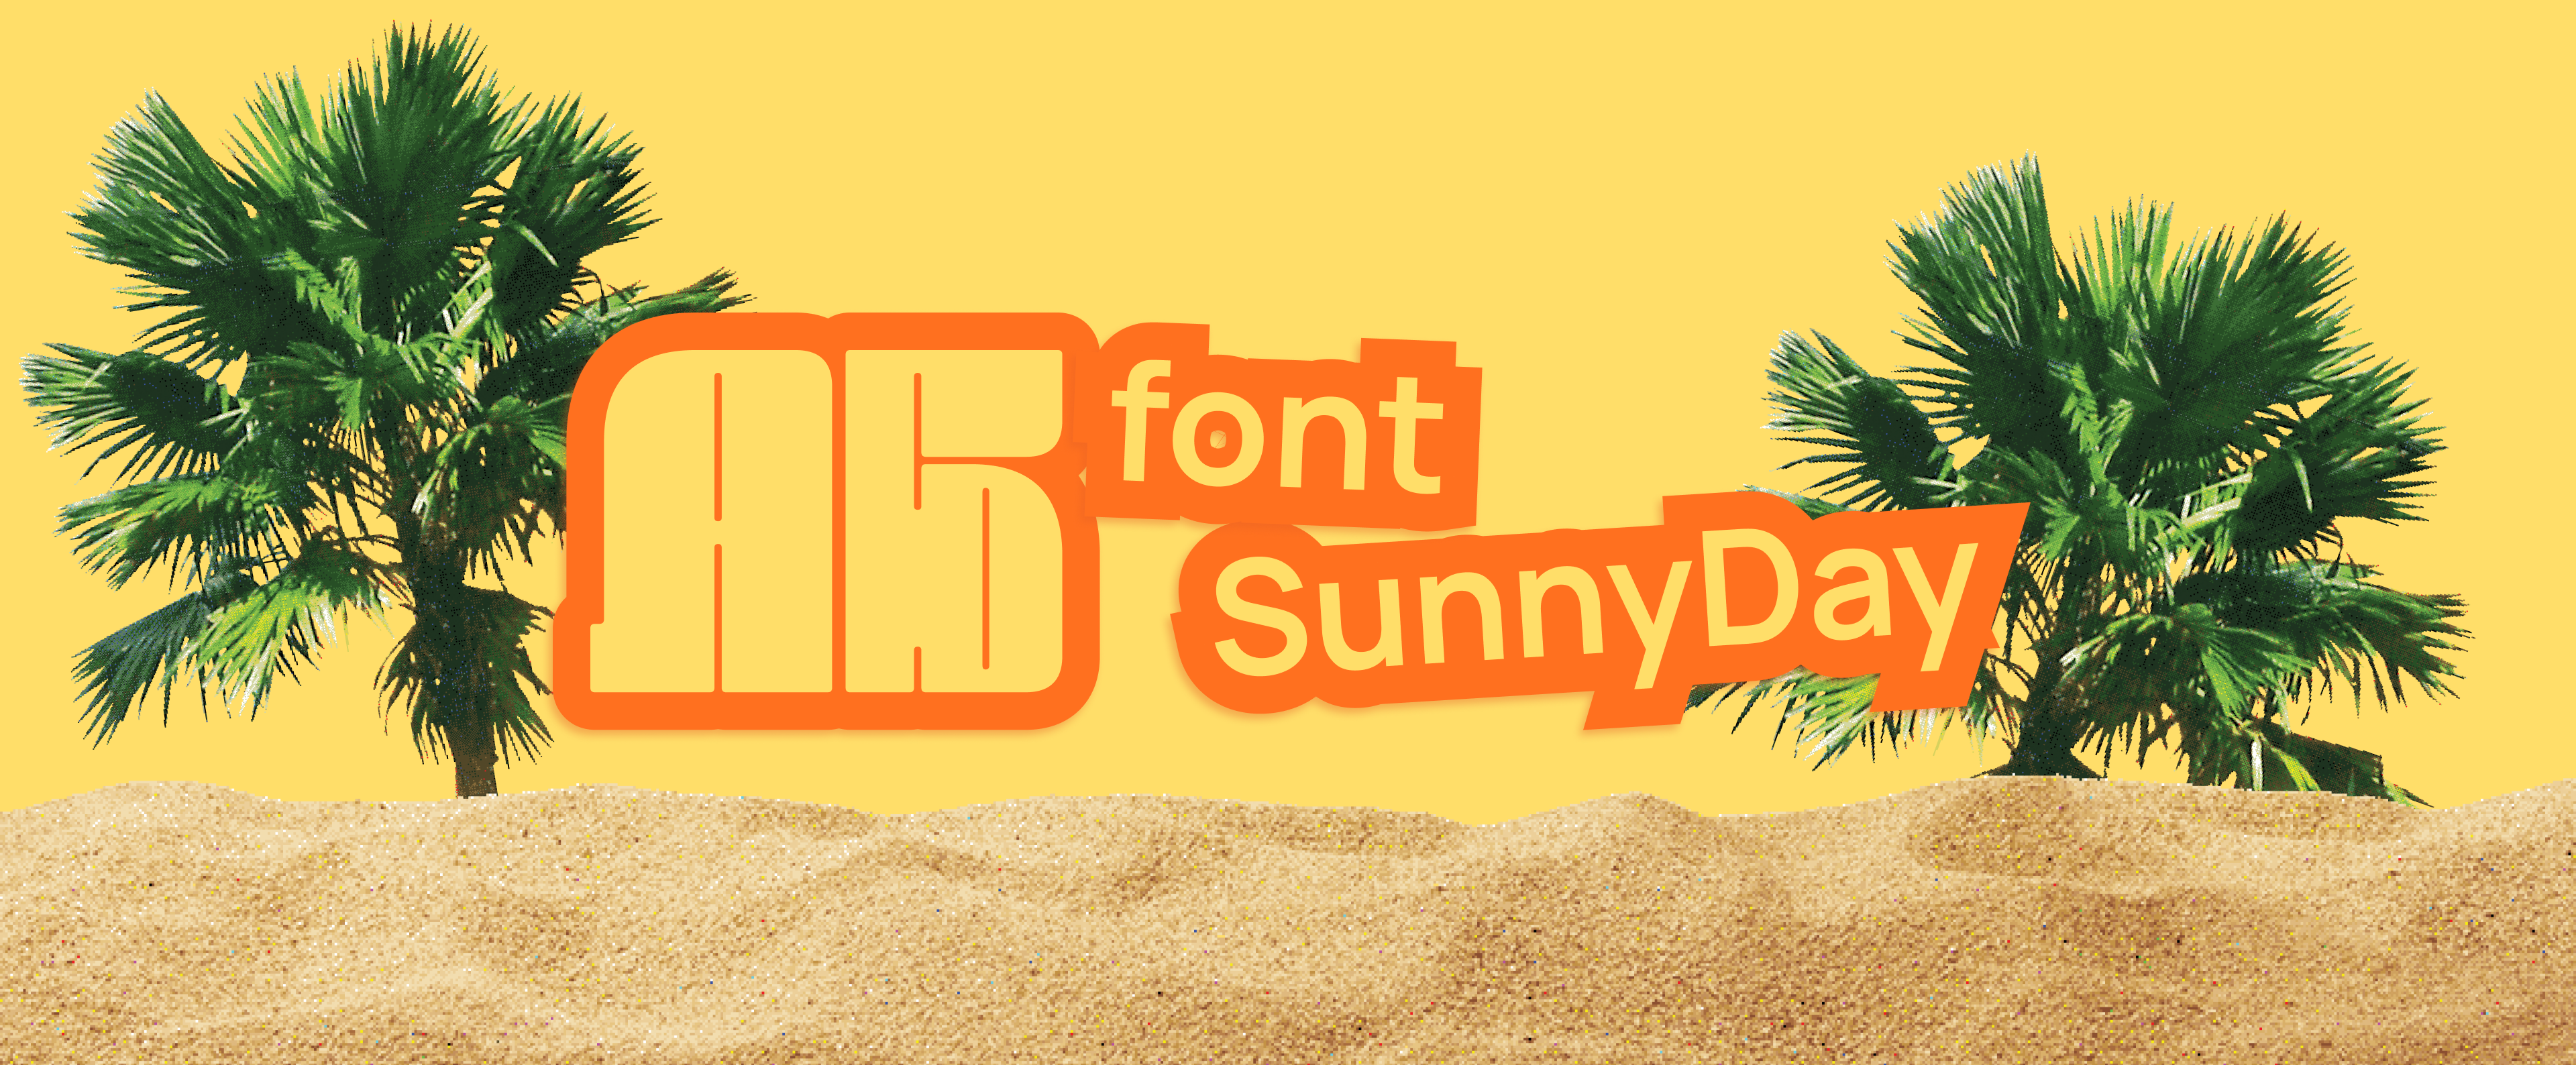 SunnyDay Font Sample - Brush strokes radiate warmth and energy.